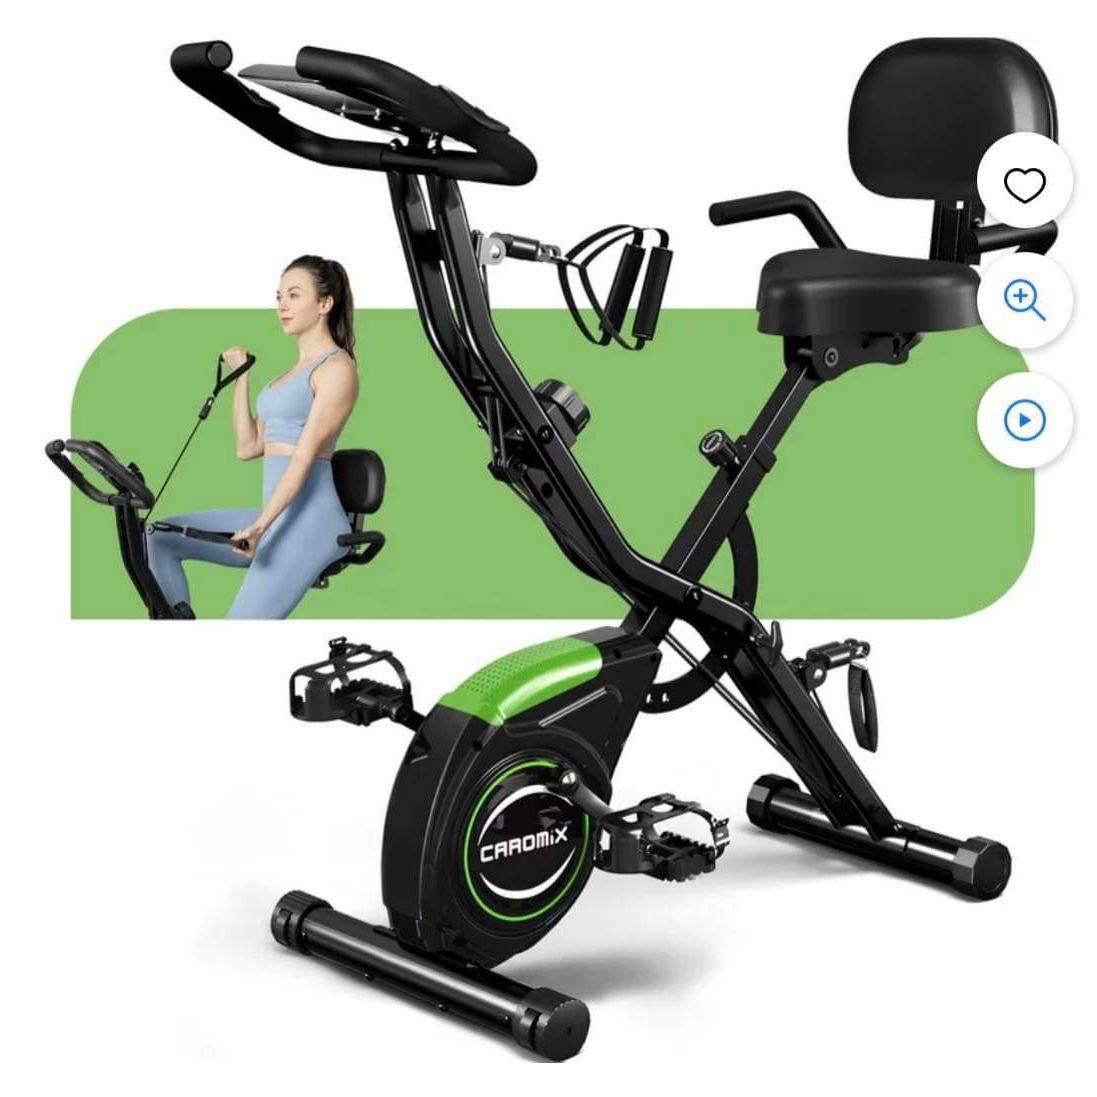 Folding Exercise Bike, 4 in 1 Stationary Bike 16-Level Magnetic Resistance Cycling Bicycle Upright Indoor Cycling Bike for Home Workout 330LB Capacity